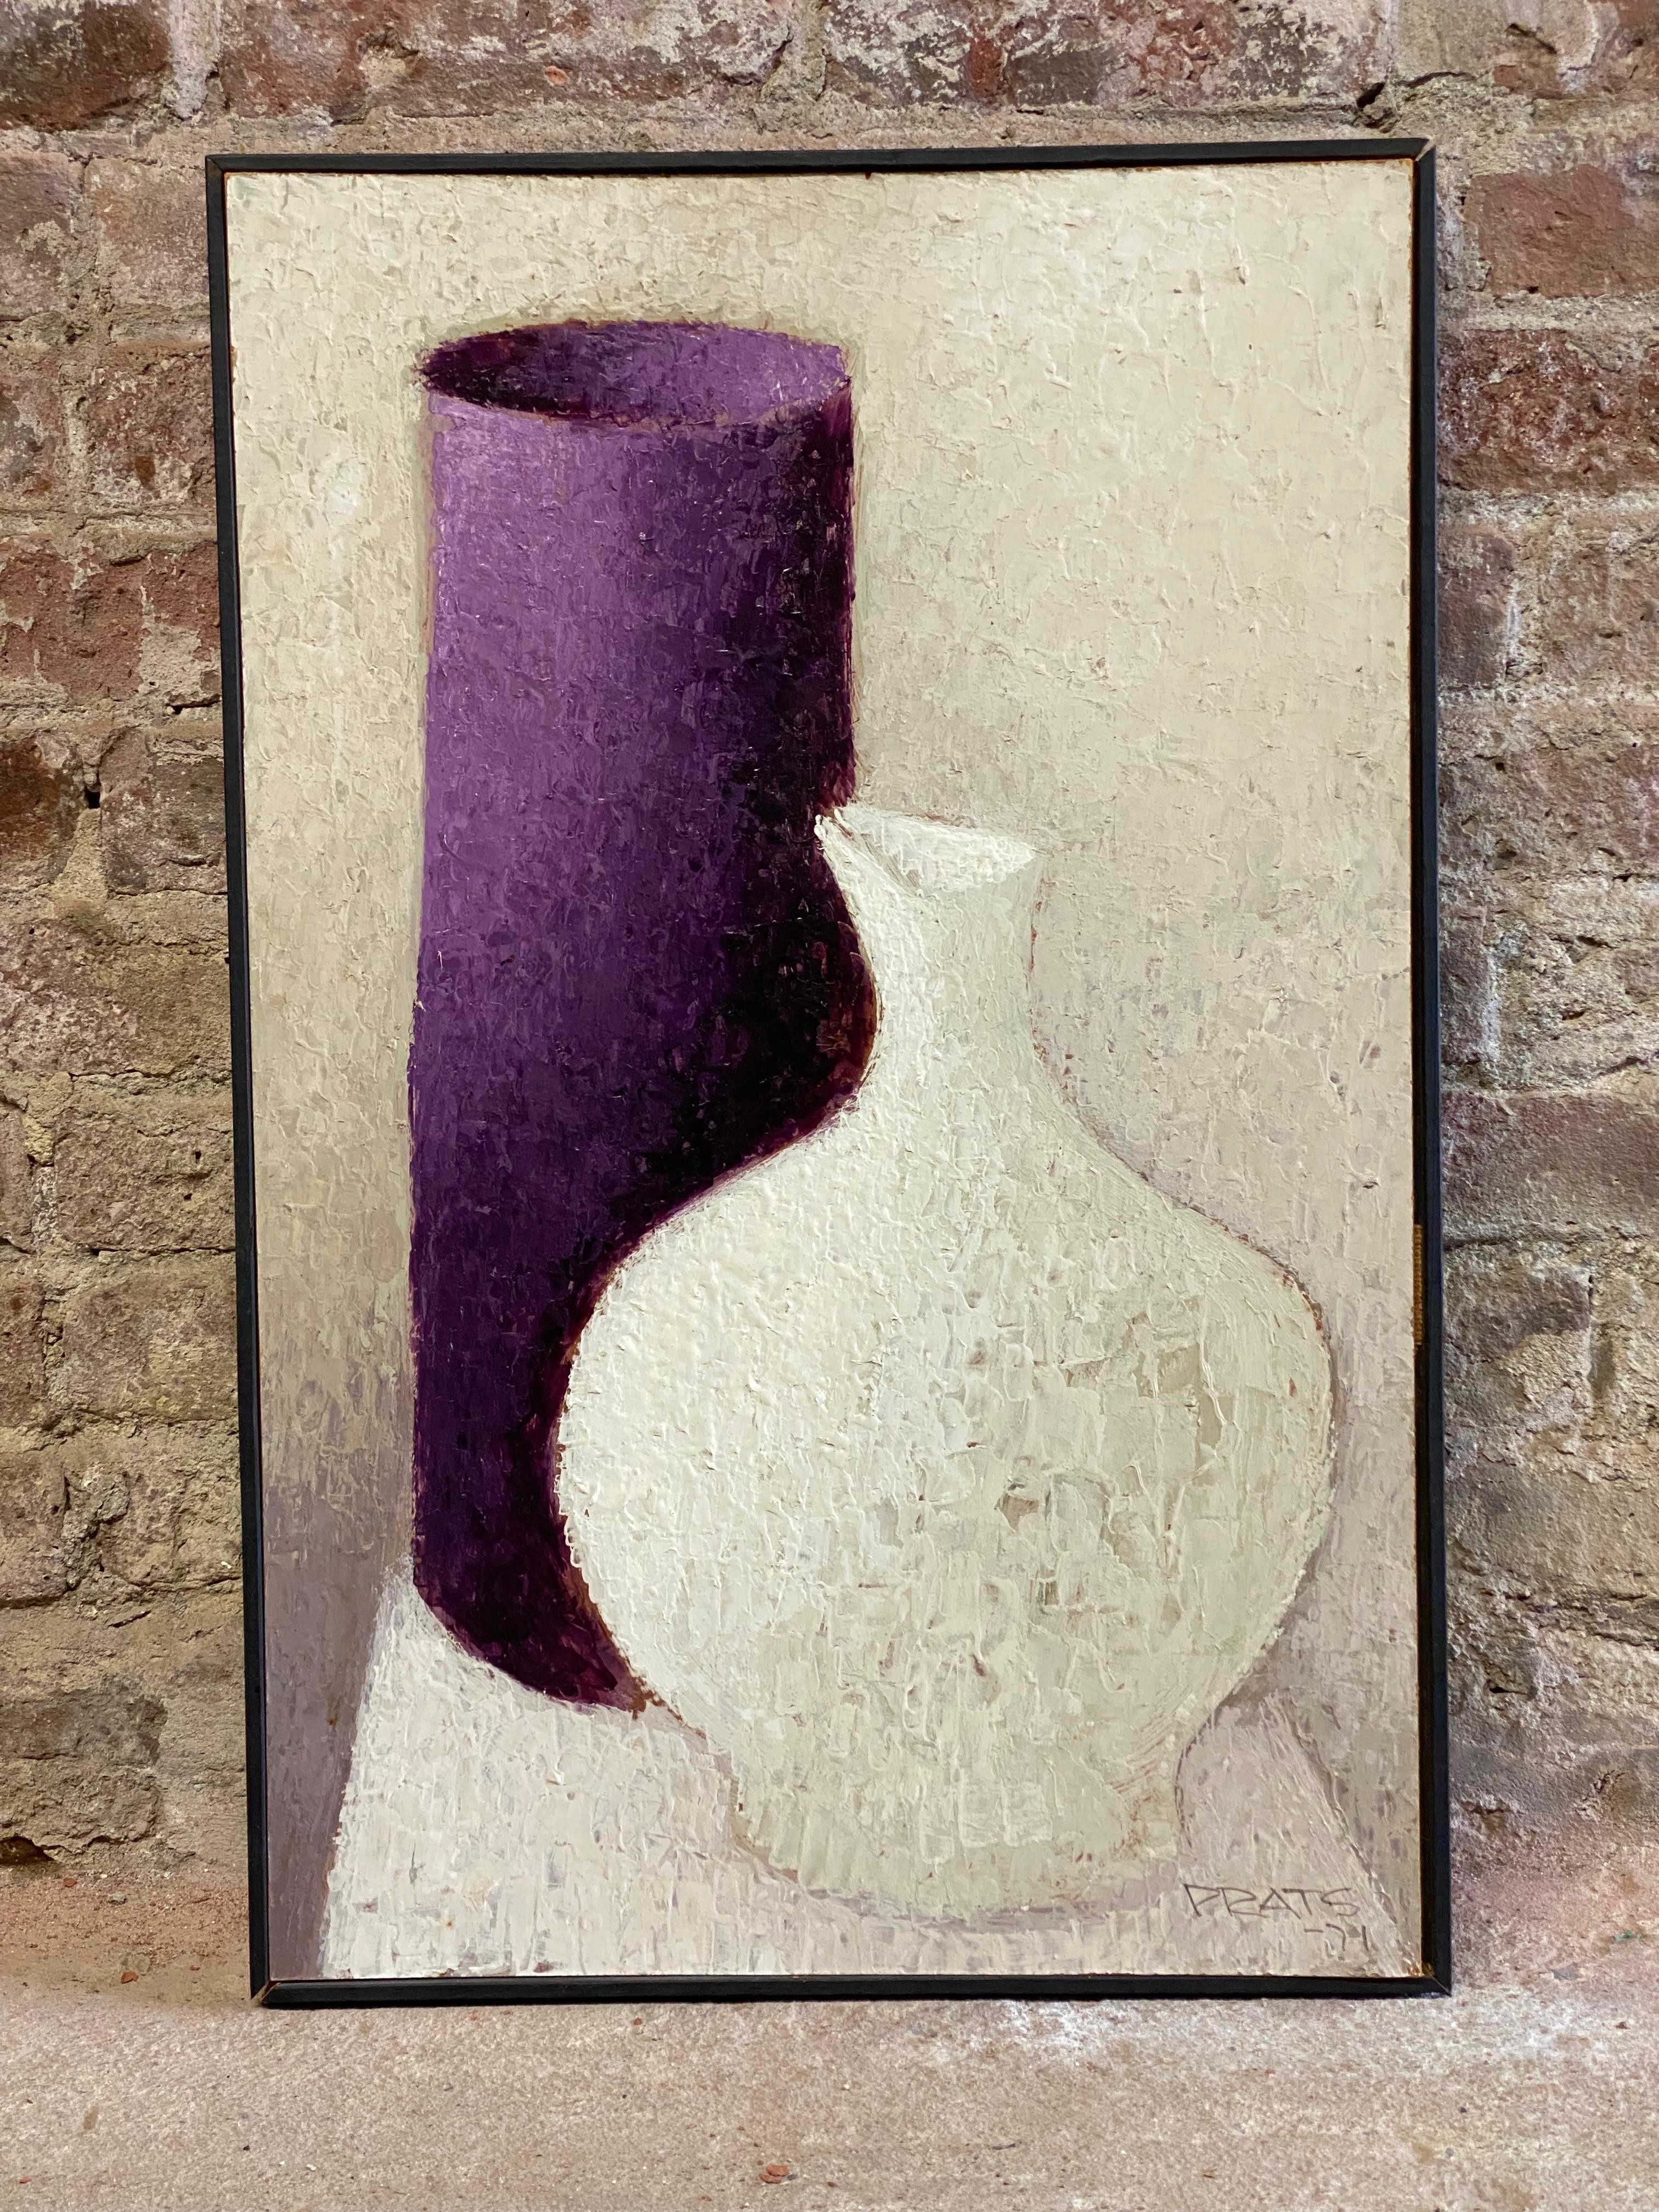 Ramon Prats (1928-2003) vase and jug still life oil paint on masonite. Circa 1971. Signed and dated lower right, Prats, '71. A peaceful rendering and reminiscent of Morandi's solitary still life paintings. Prats' stippling effect with the brush or